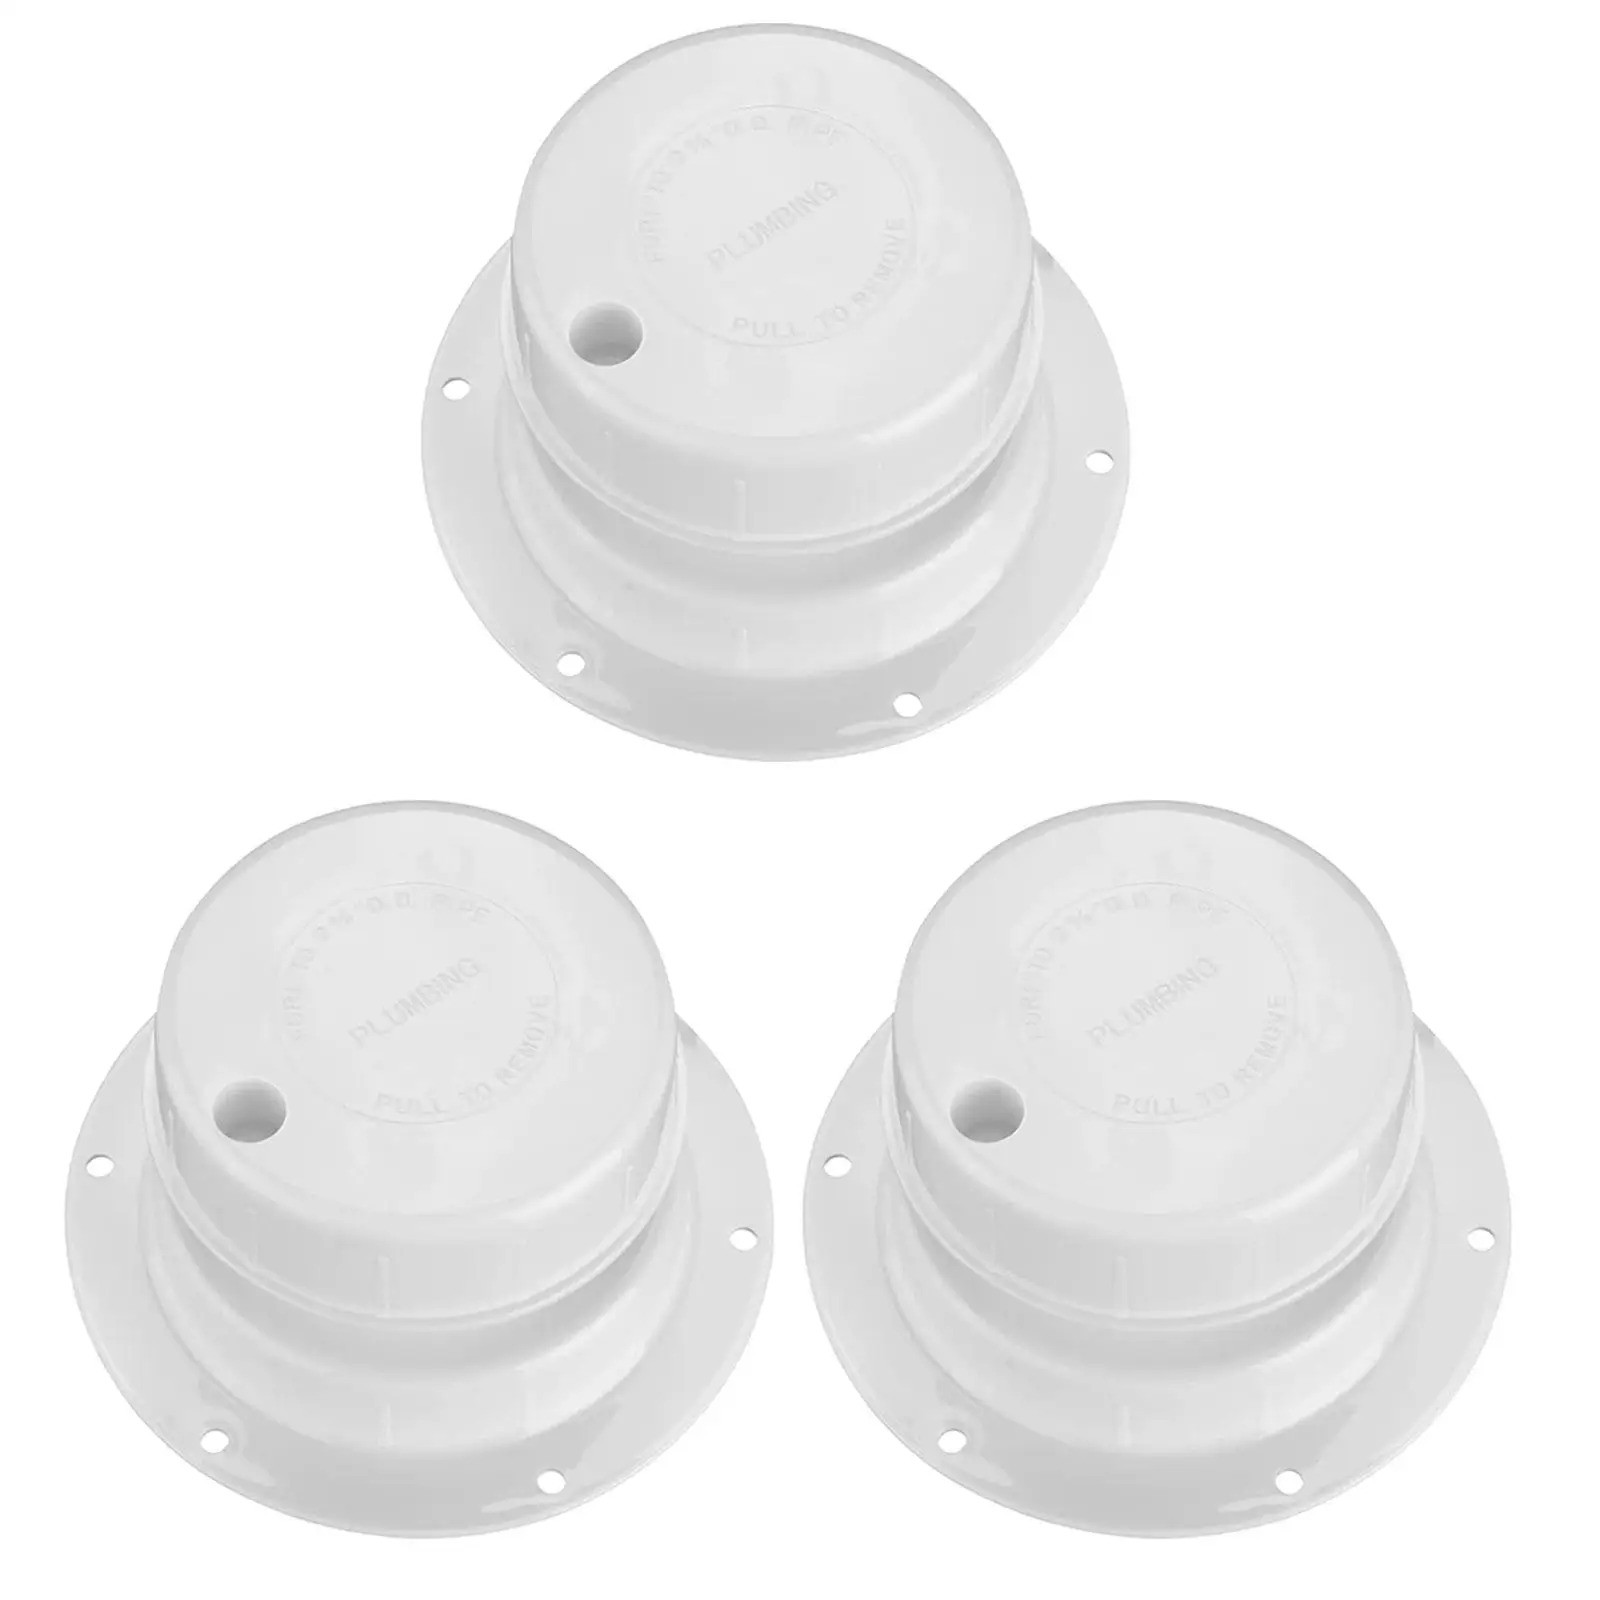 RV Plumbing Vent Cap Directly Replace for 1 to 2 3/8 inch Pipe Camper Vent Cap White RV Sewer Vent Cap for Trailers Campers